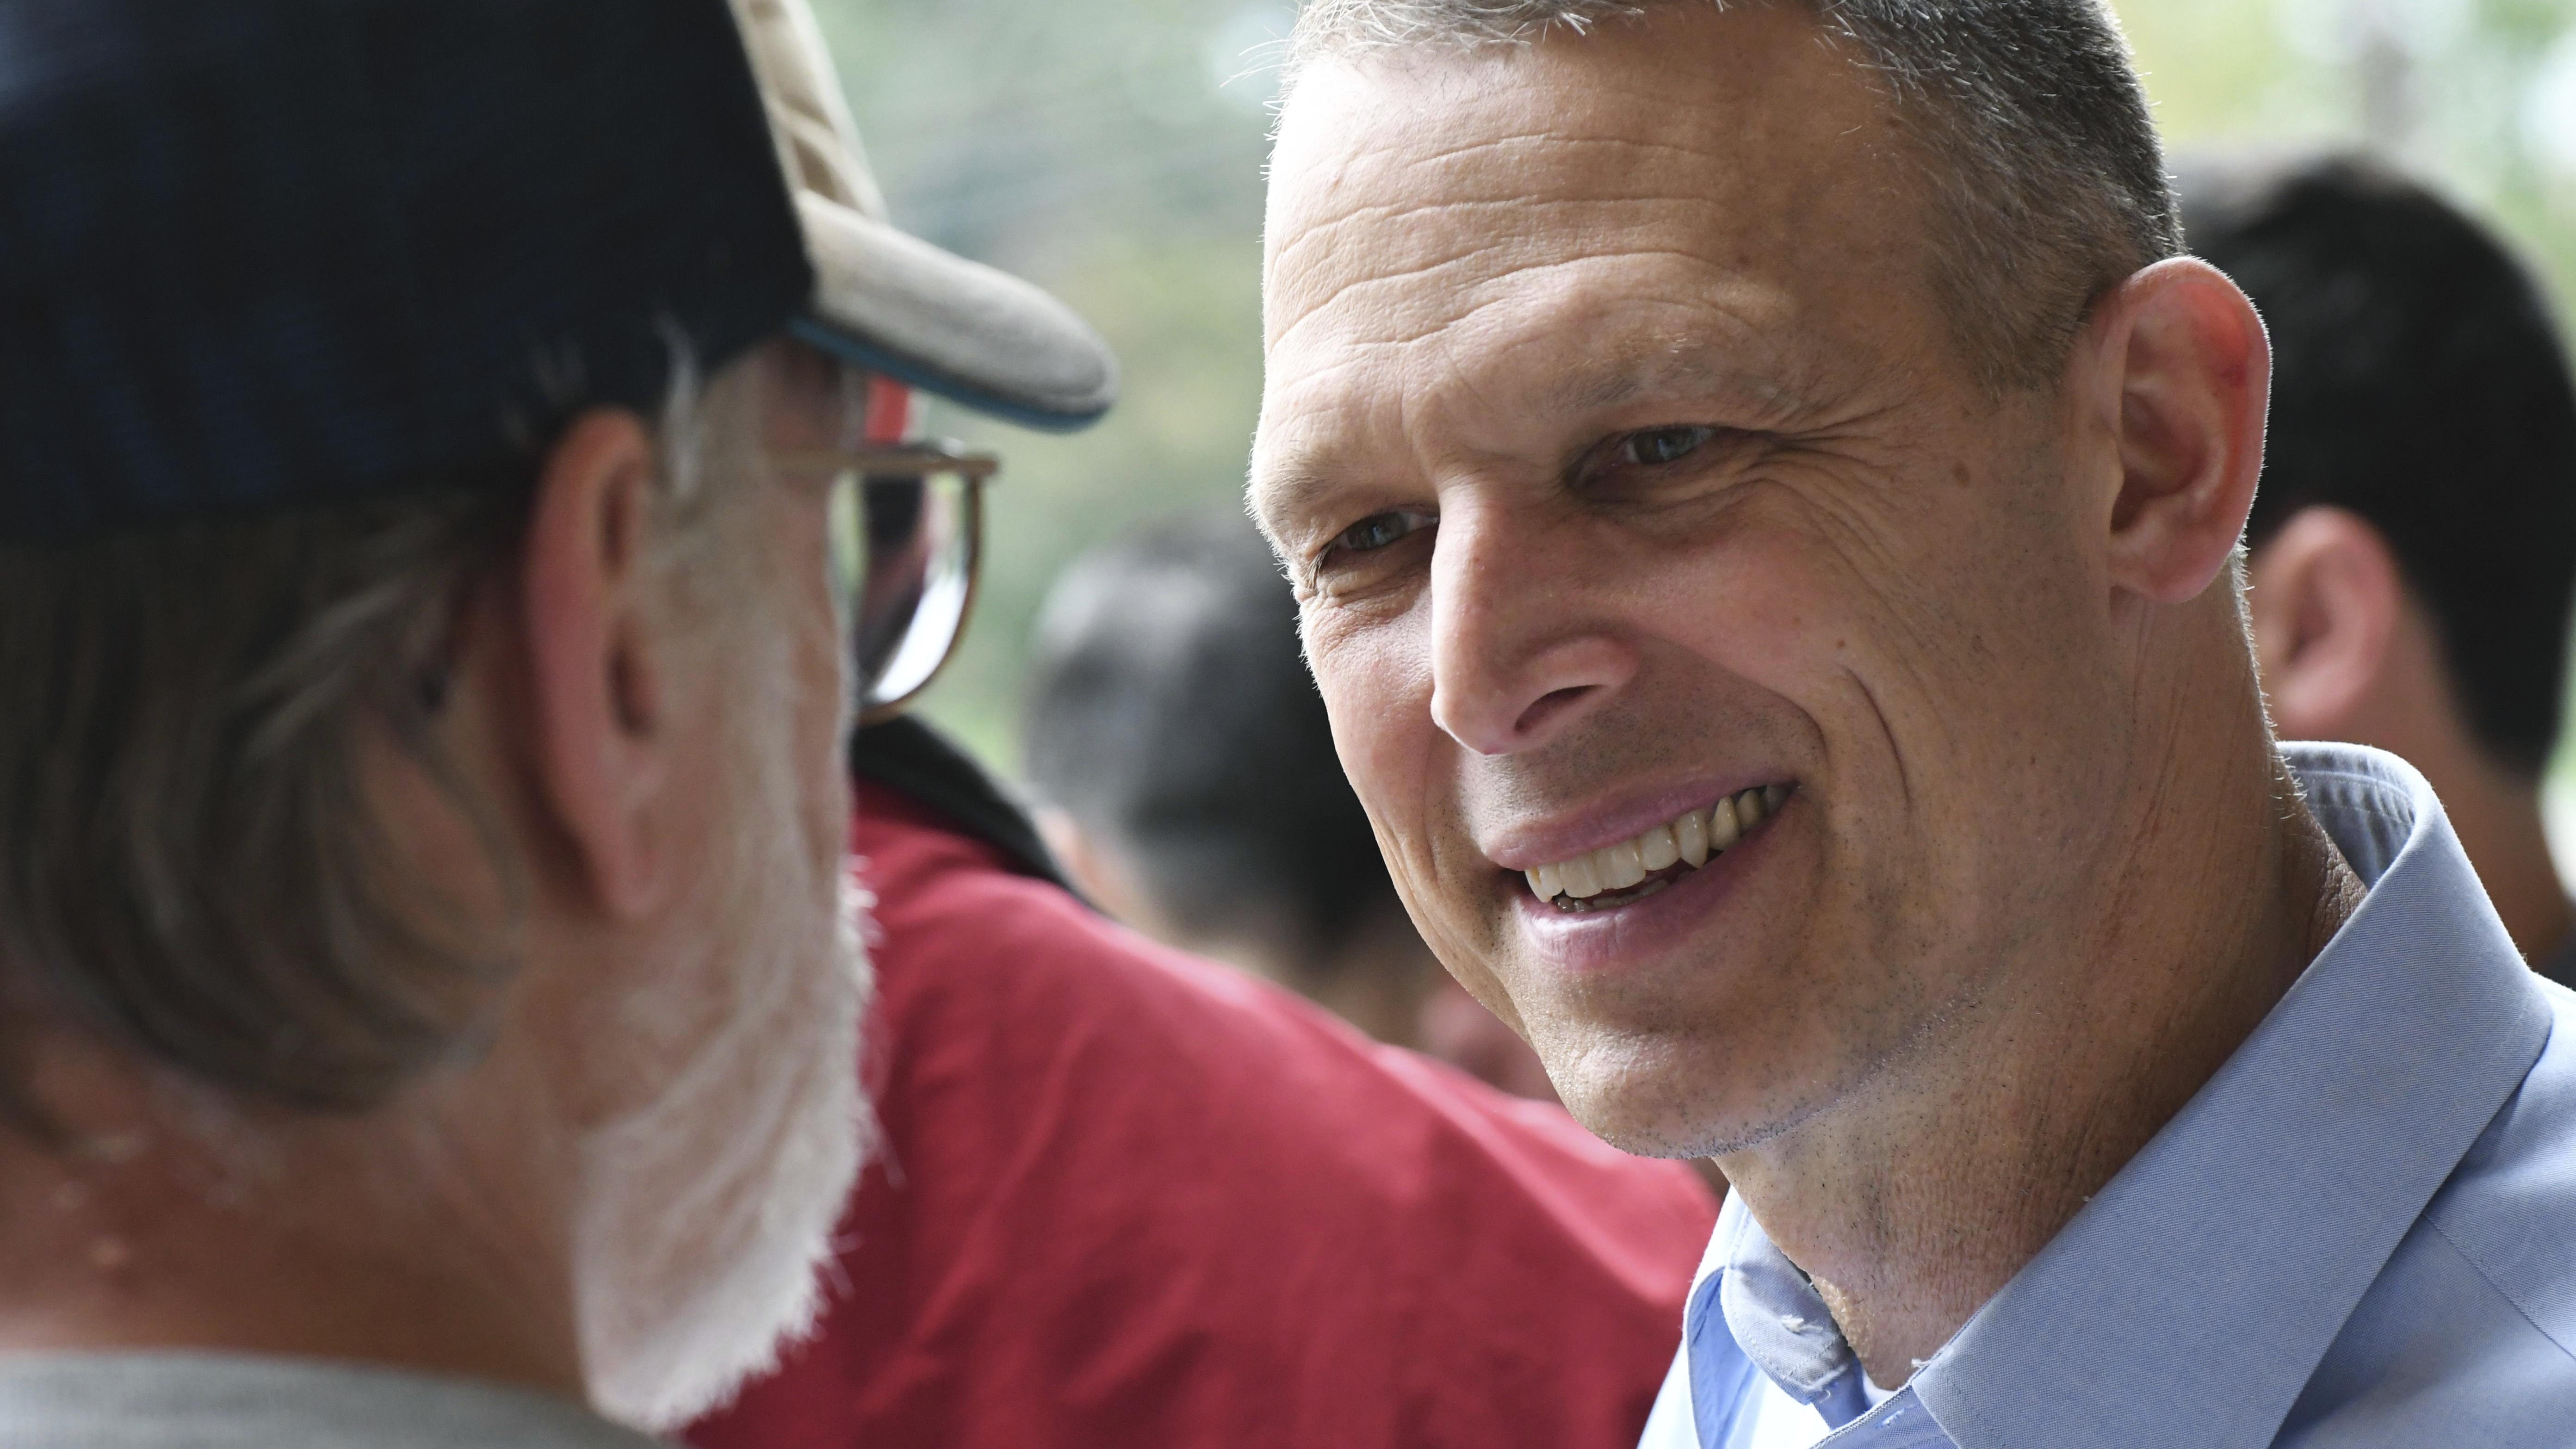 In this Oct. 6, 2018 photo, Republican U.S. Rep. Scott Perry of Pennsylvania speaks to a party committeeman at a rally with volunteer canvassers, in Harrisburg, Pa. A court-ordered redrawing of Pennsylvania's House districts has forced several Republican congressmen, including Perry, into more competitive seats and helped establish Pennsylvania as a key state for Democrats aiming to recapture the House majority. (AP Photo/Marc Levy)